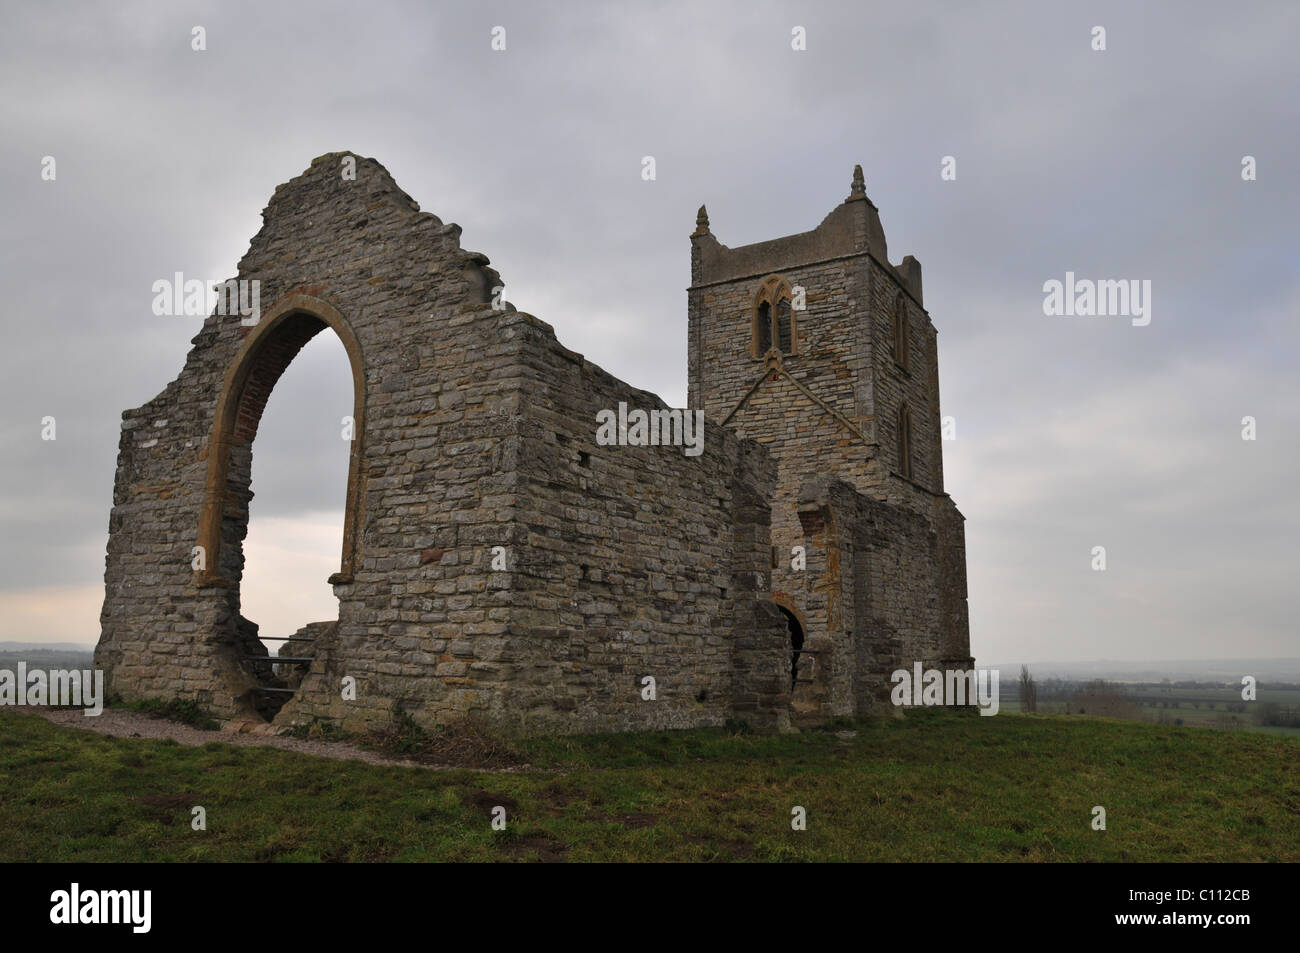 The ruins of St Michael's church on Burrow Mump situated at Taunton Deane, Somerset Stock Photo